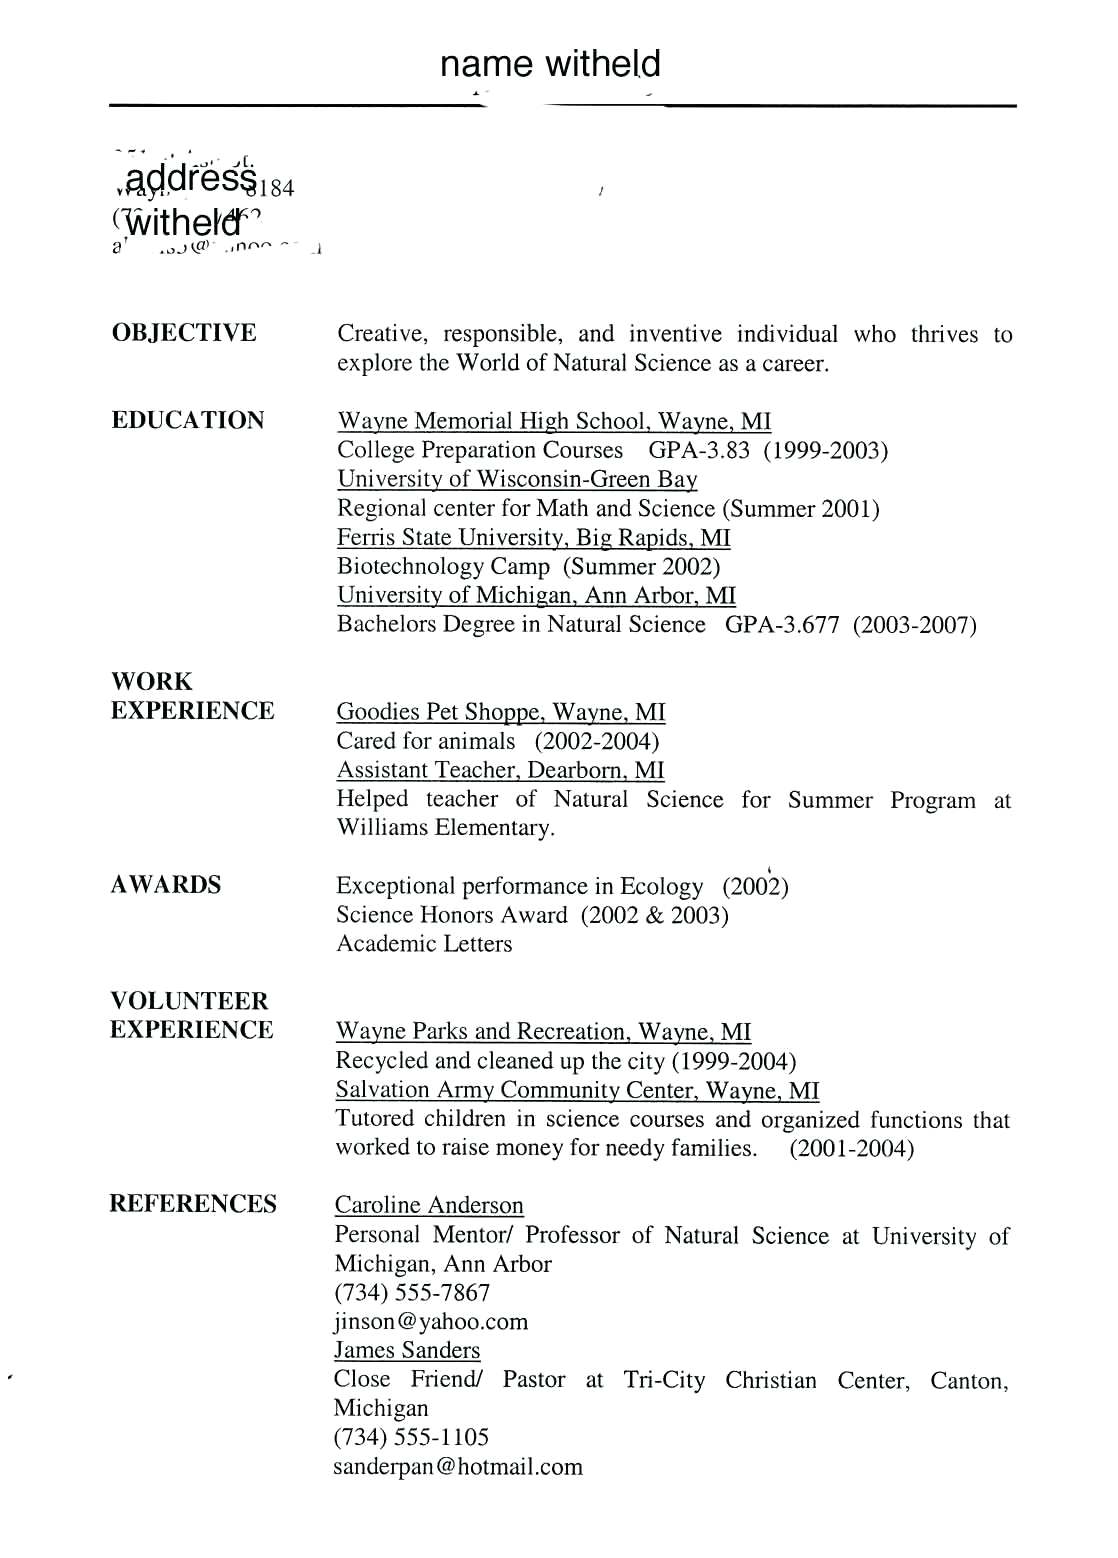 High School Student Resume College Resume For High School Students Math Essay For Or Against Nuclear Power Buy Mathematics Student Resume Sample Objective Samples Summer Job It Examples Students Math high school student resume|wikiresume.com